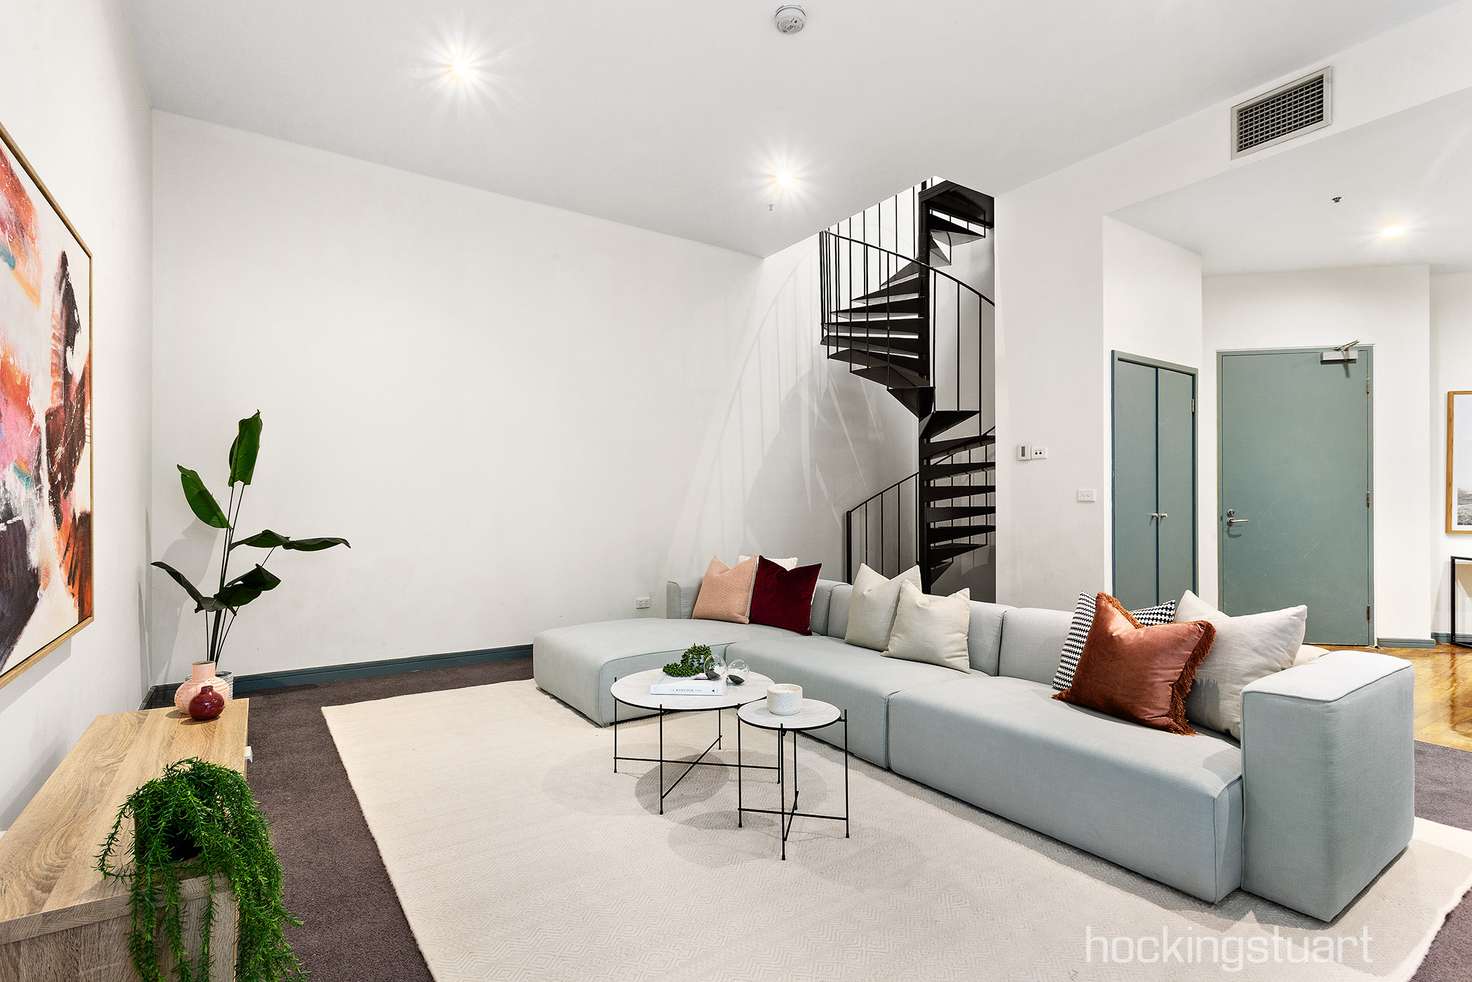 Main view of Homely apartment listing, 42/398 La Trobe Street, Melbourne VIC 3000